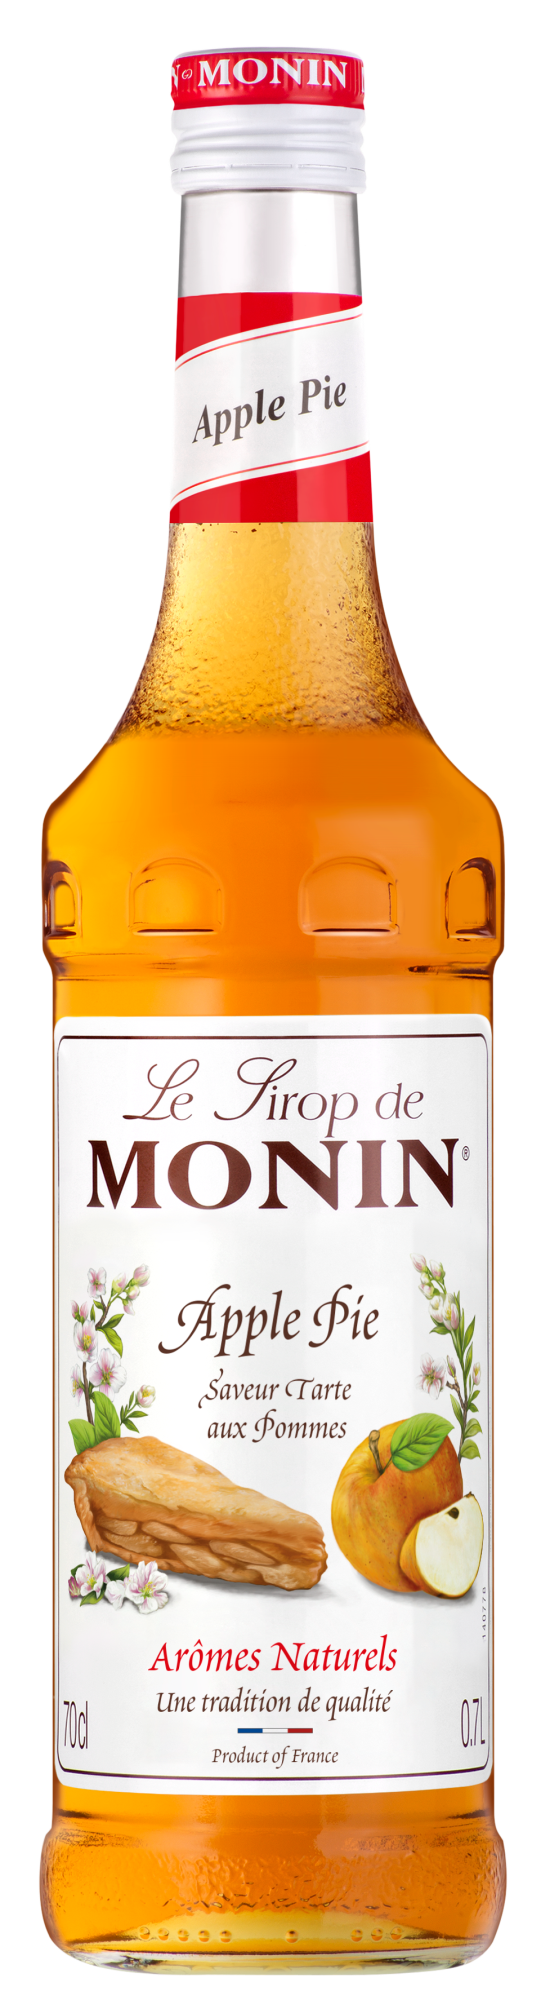 Buy MONIN Apple Pie Syrup. It captures the spicy, rich, juicy indulgence from the world famous dessert.